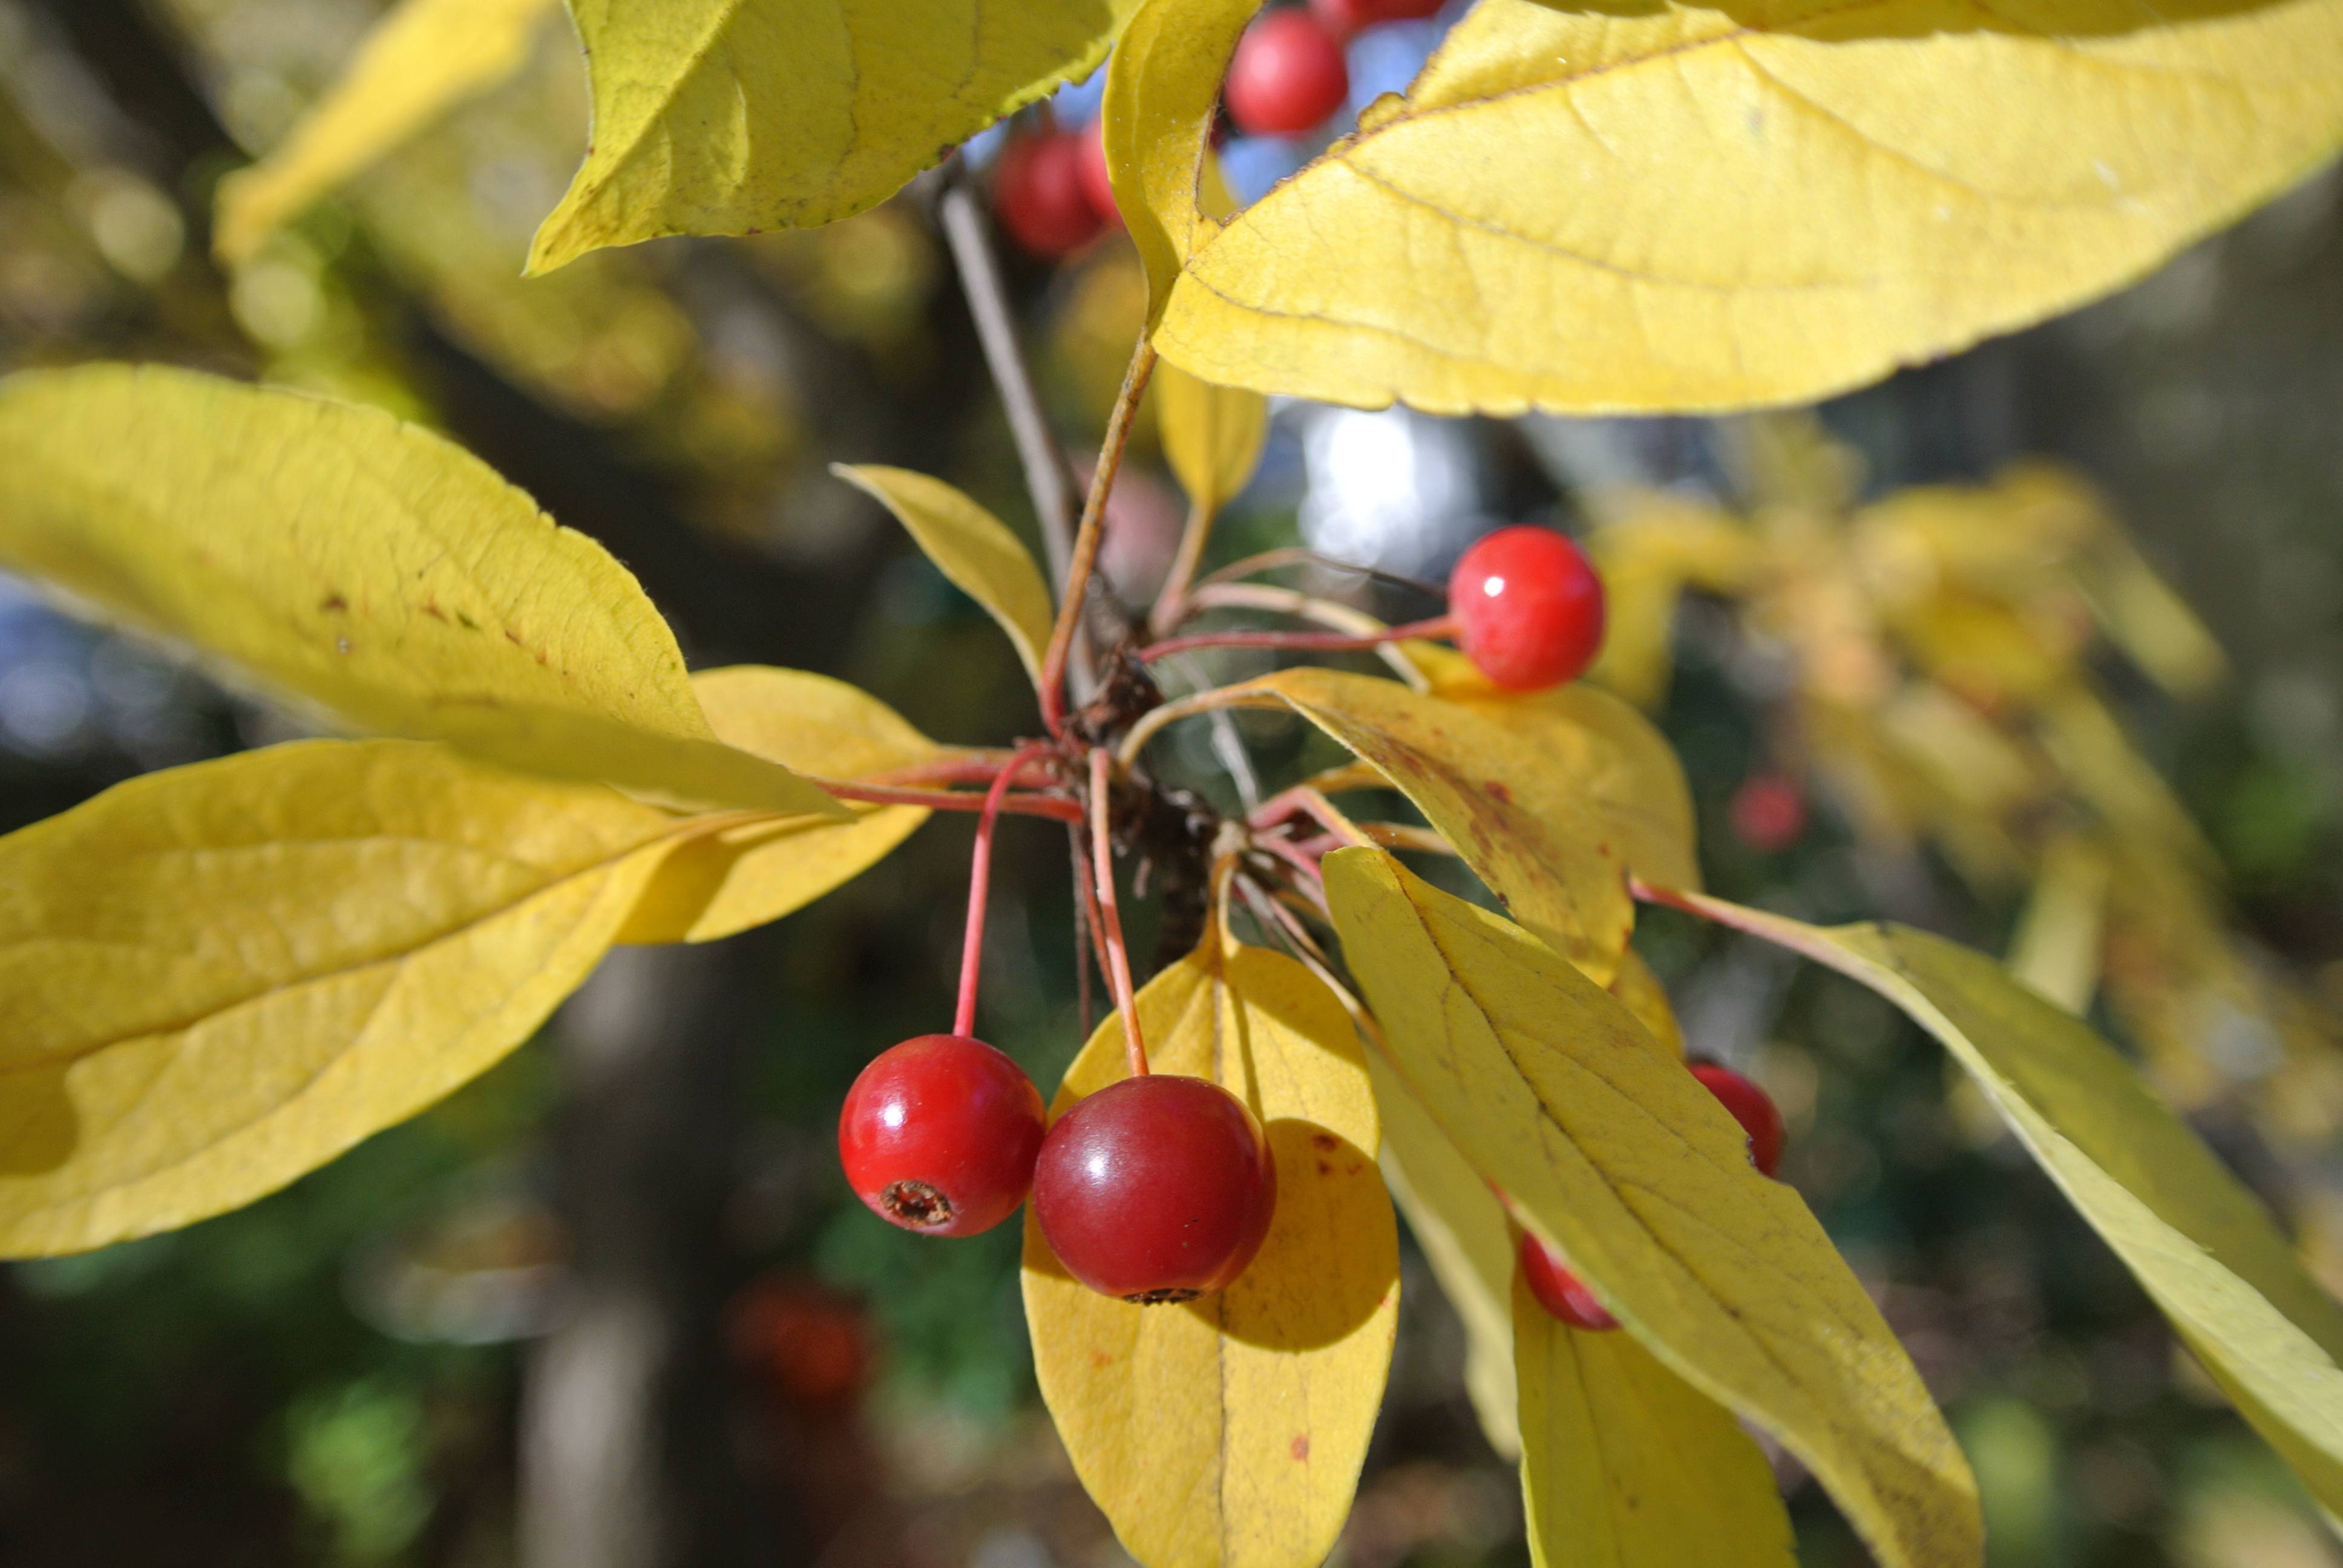 shiny, small, round, red fruits with yellow, ovate, shiny leaves, and gray-brown stems